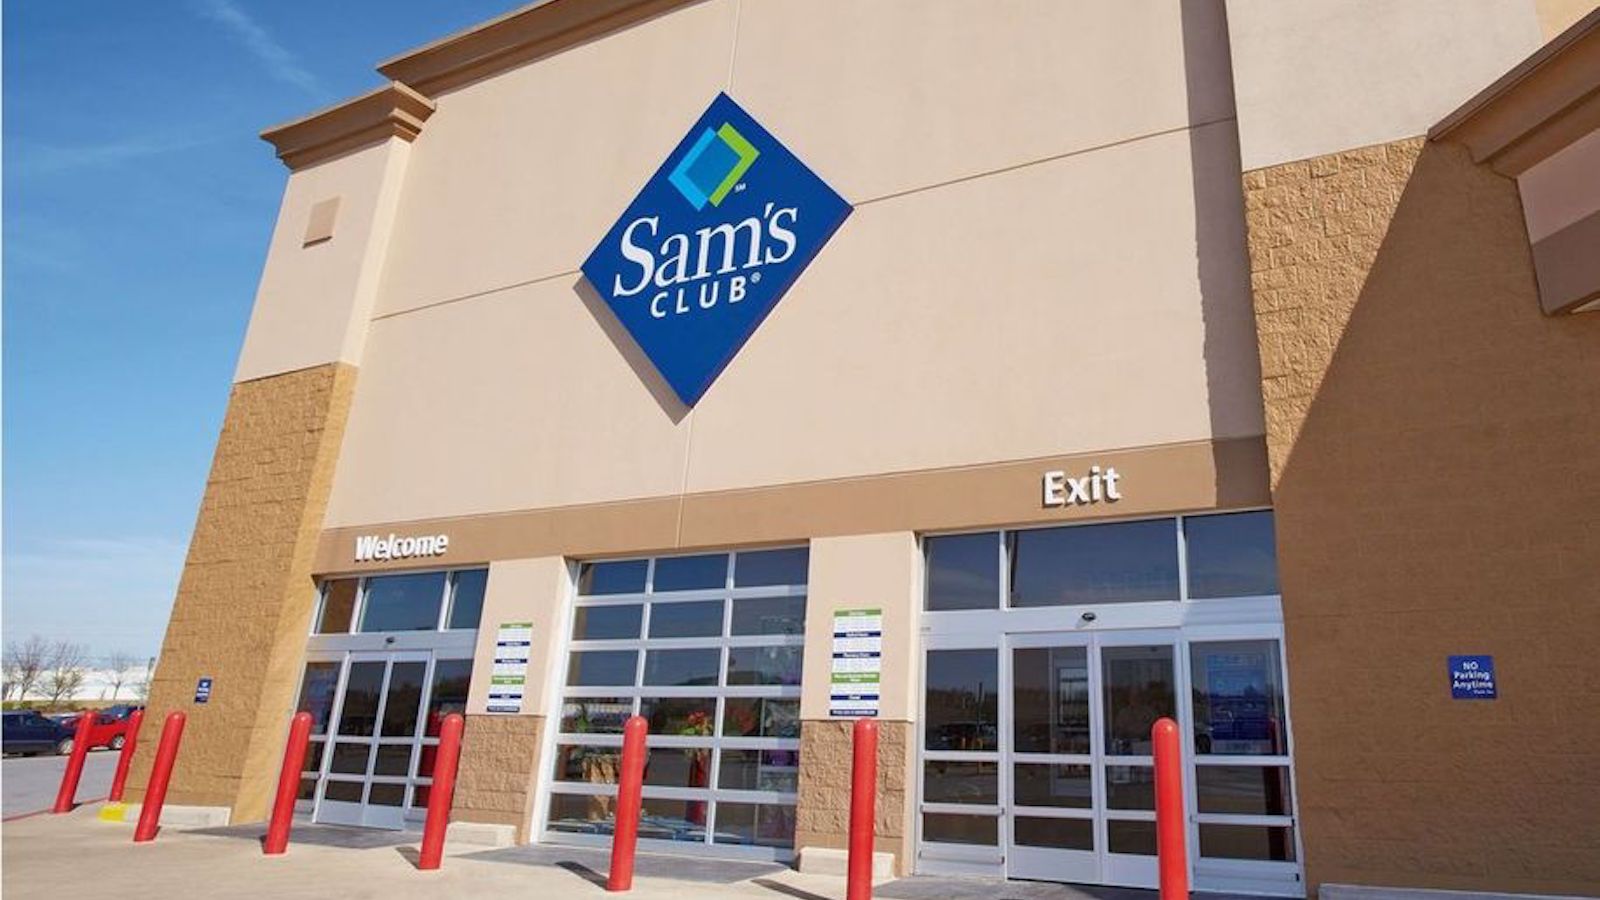 Here's how you can get an $8 Sam's Club annual membership